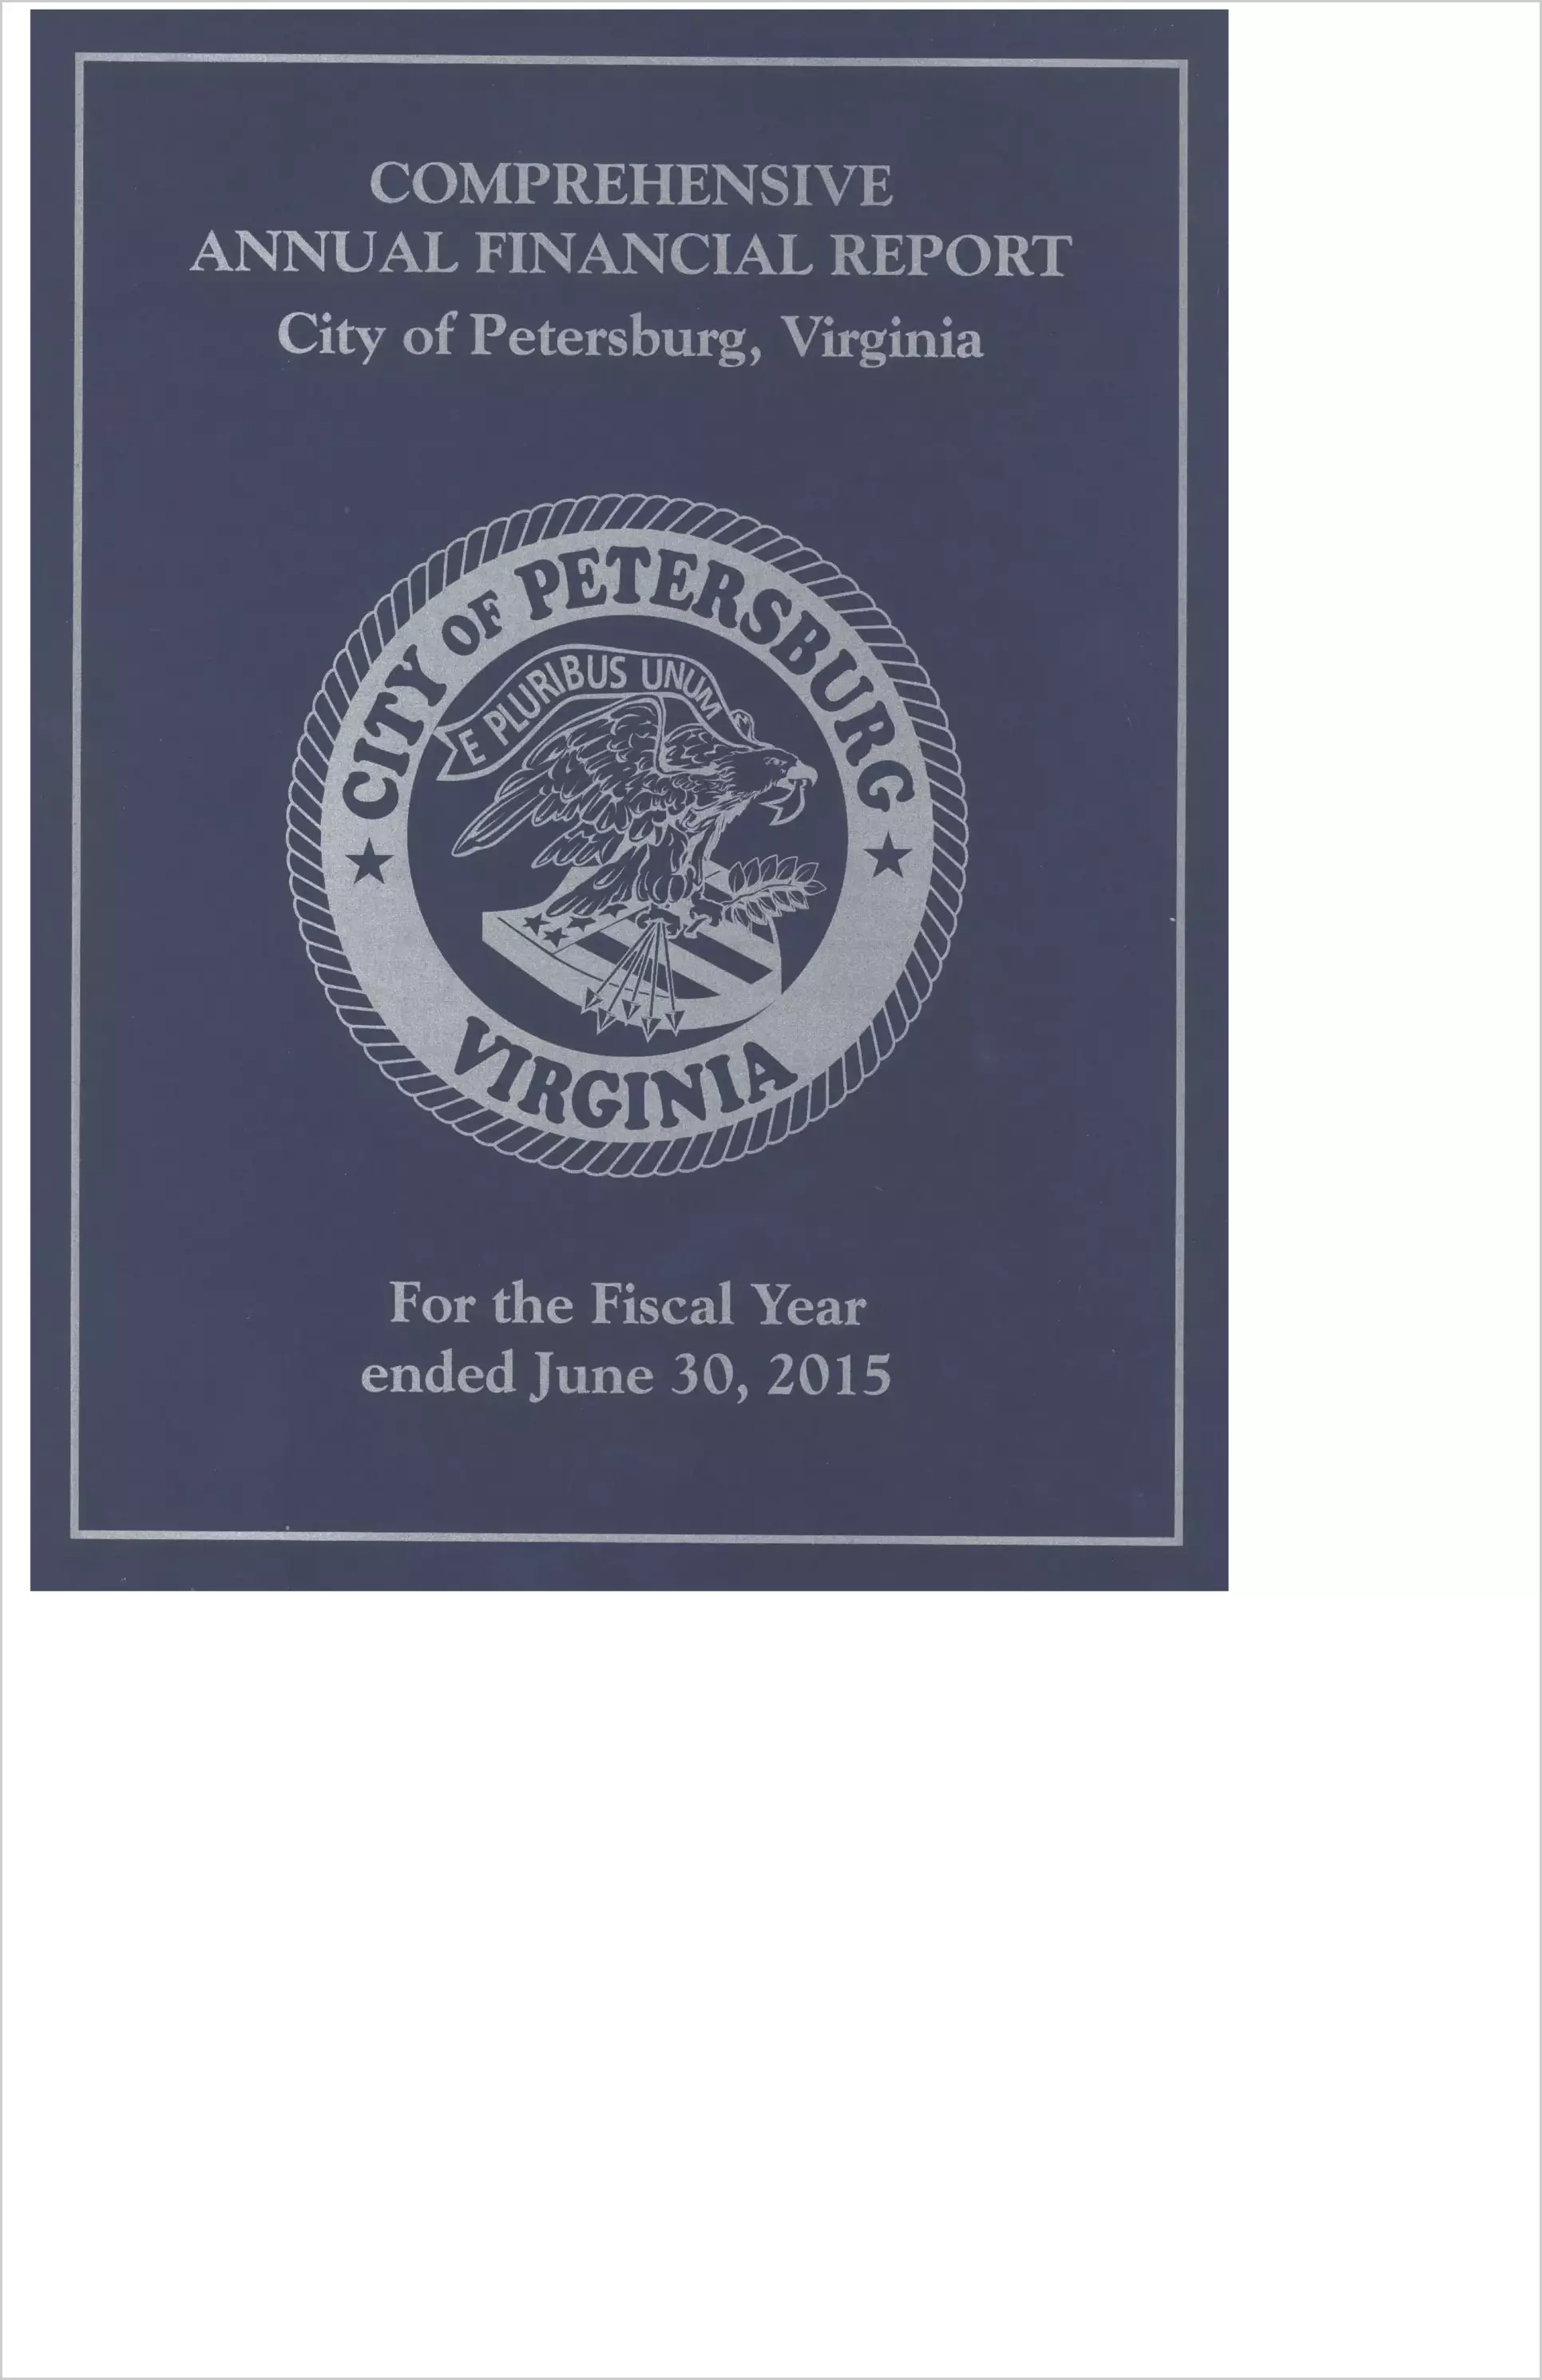 2015 Annual Financial Report for City of Petersburg